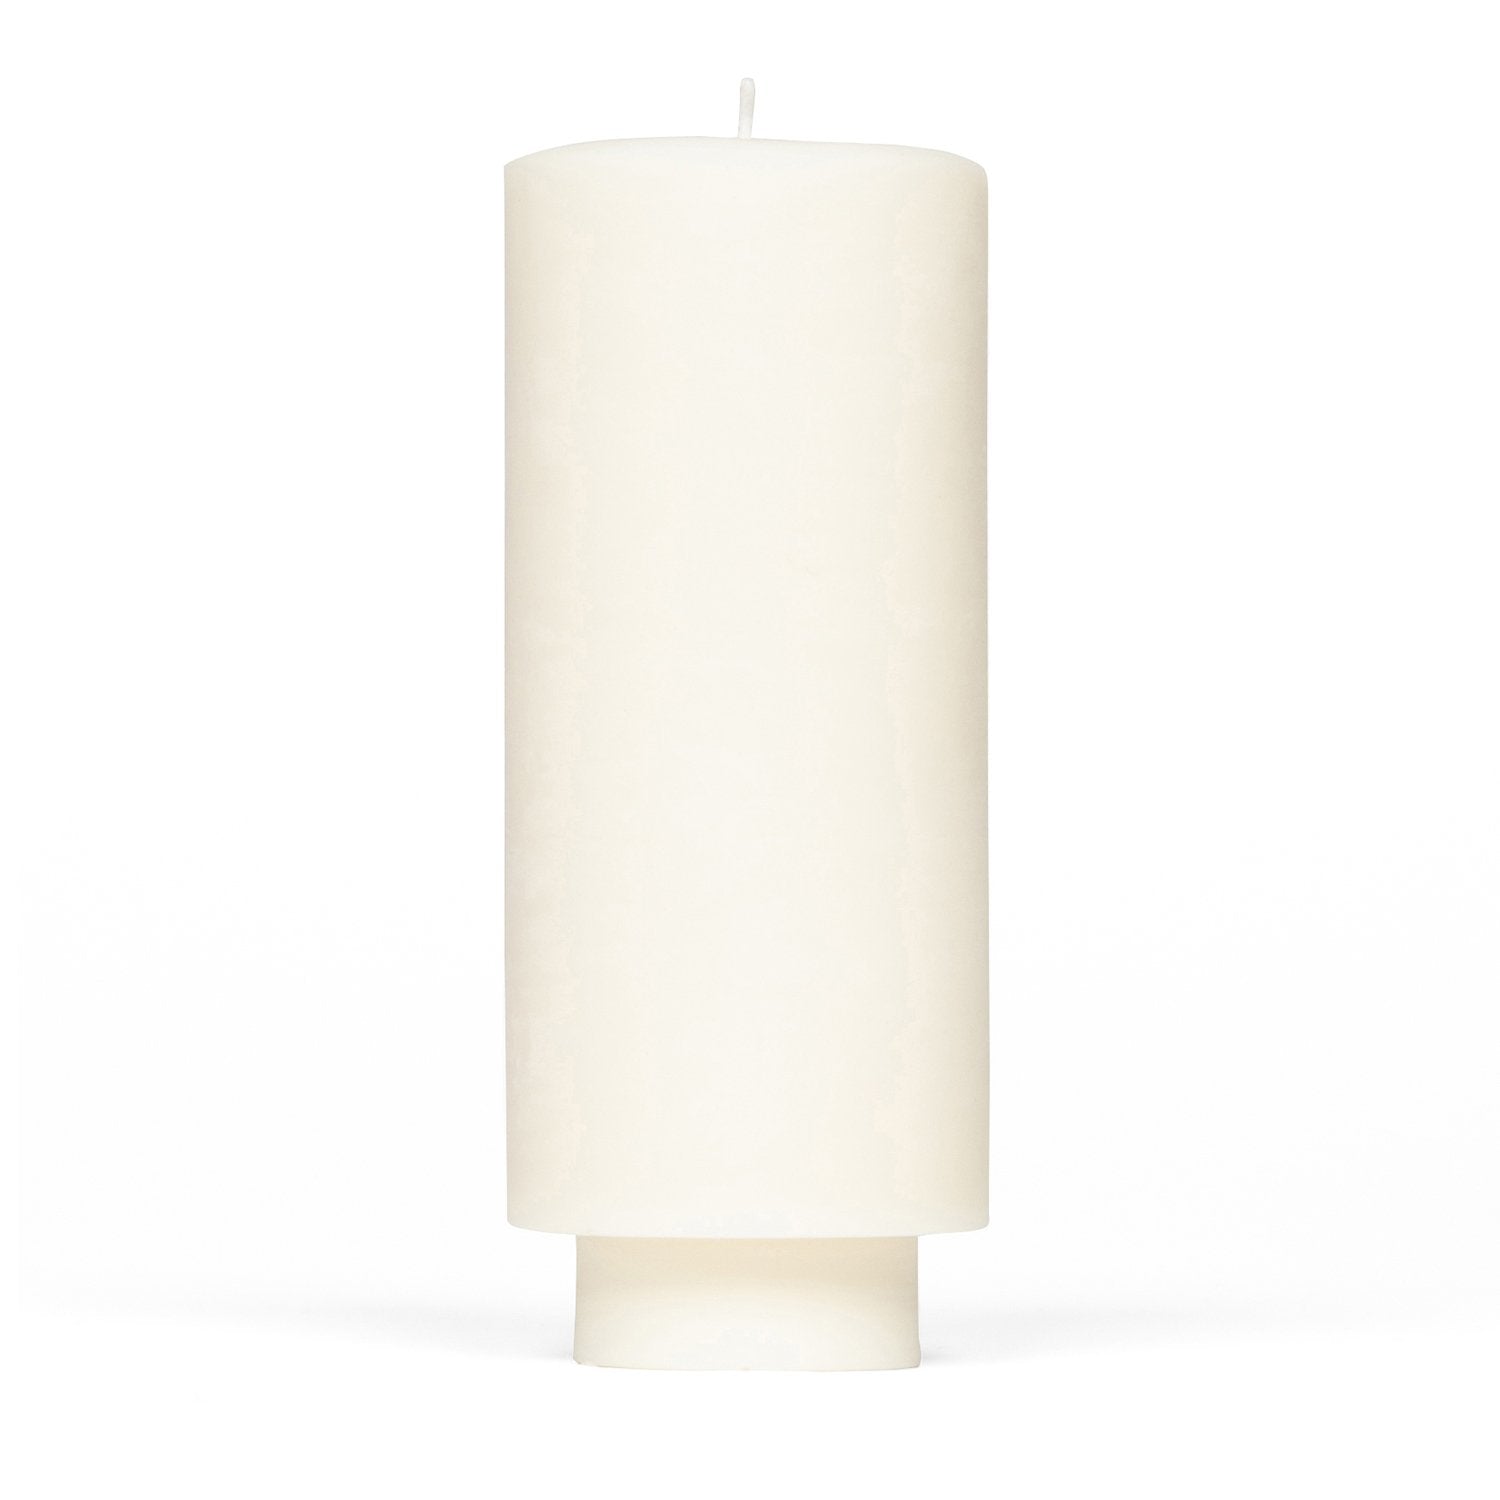 Slim Replacement Candle Concrete & Wax